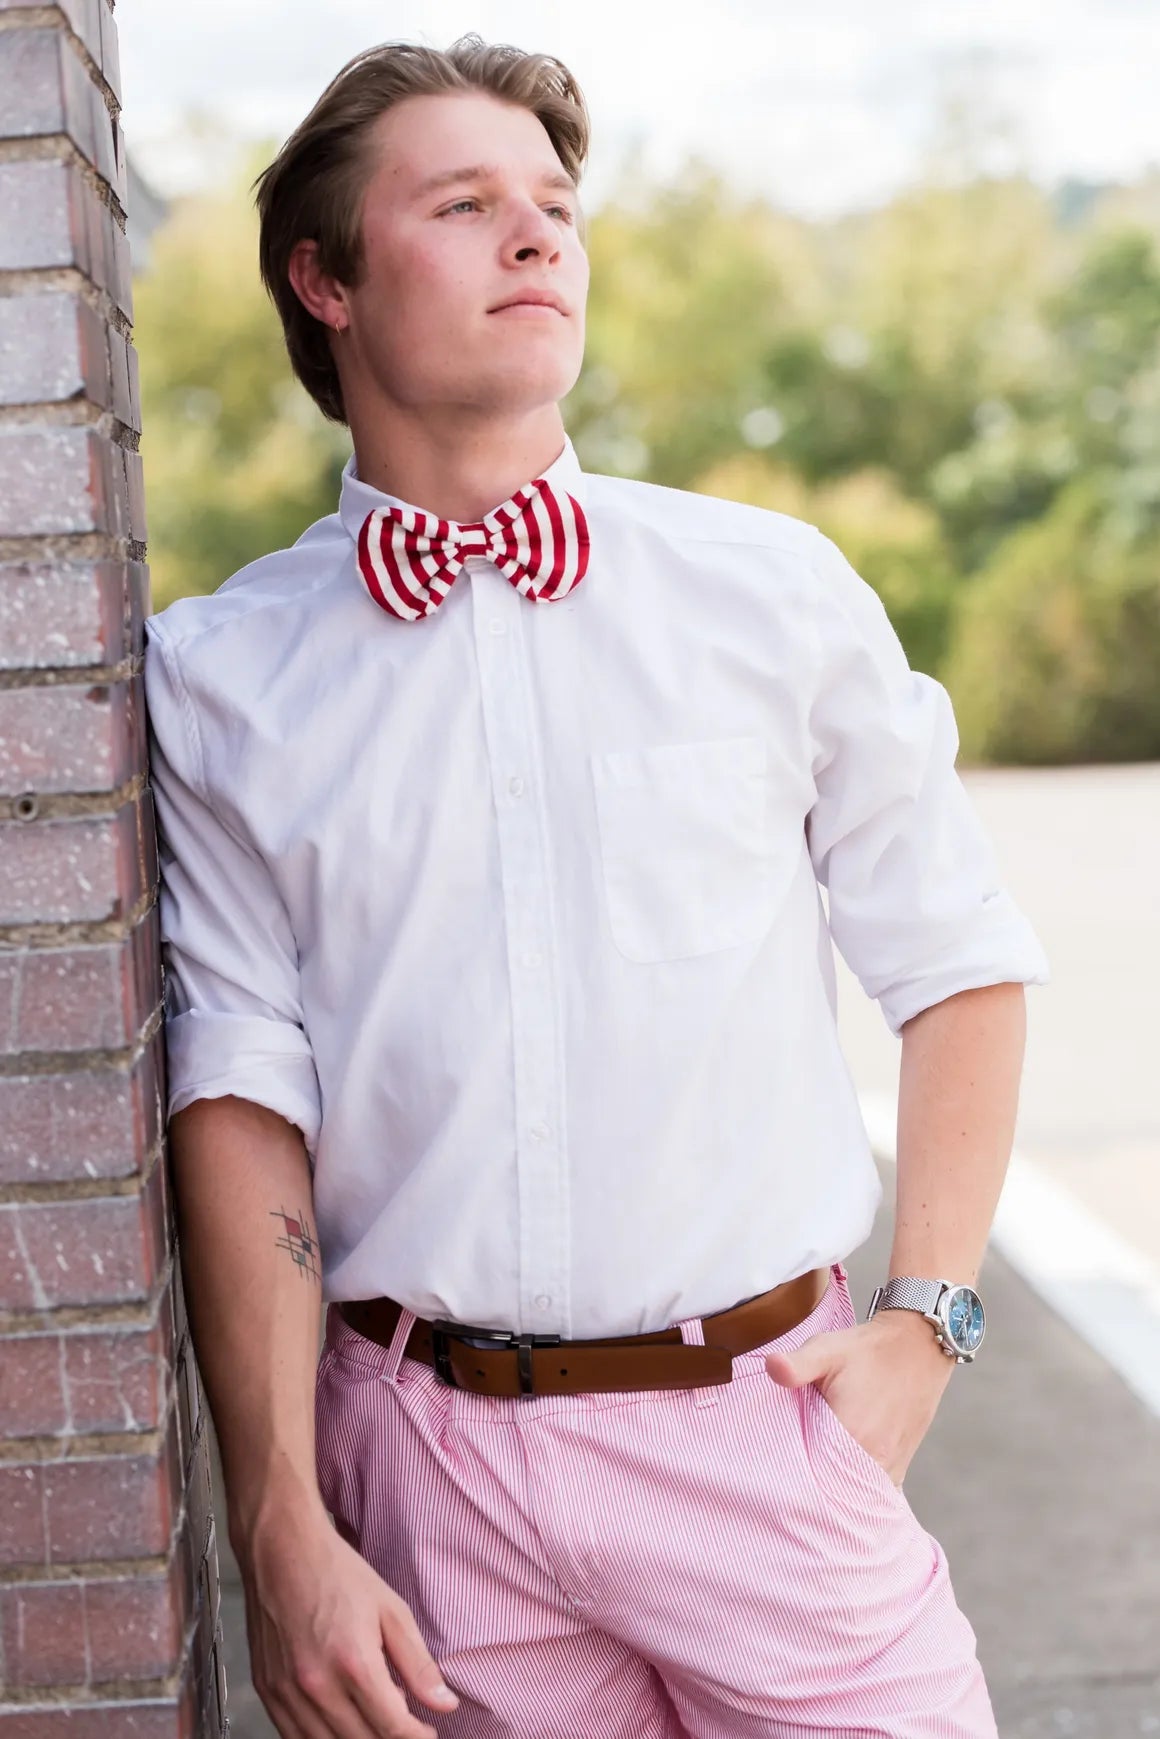 A customer wearing a fashionable Bow Tie designed by The Simple Bow